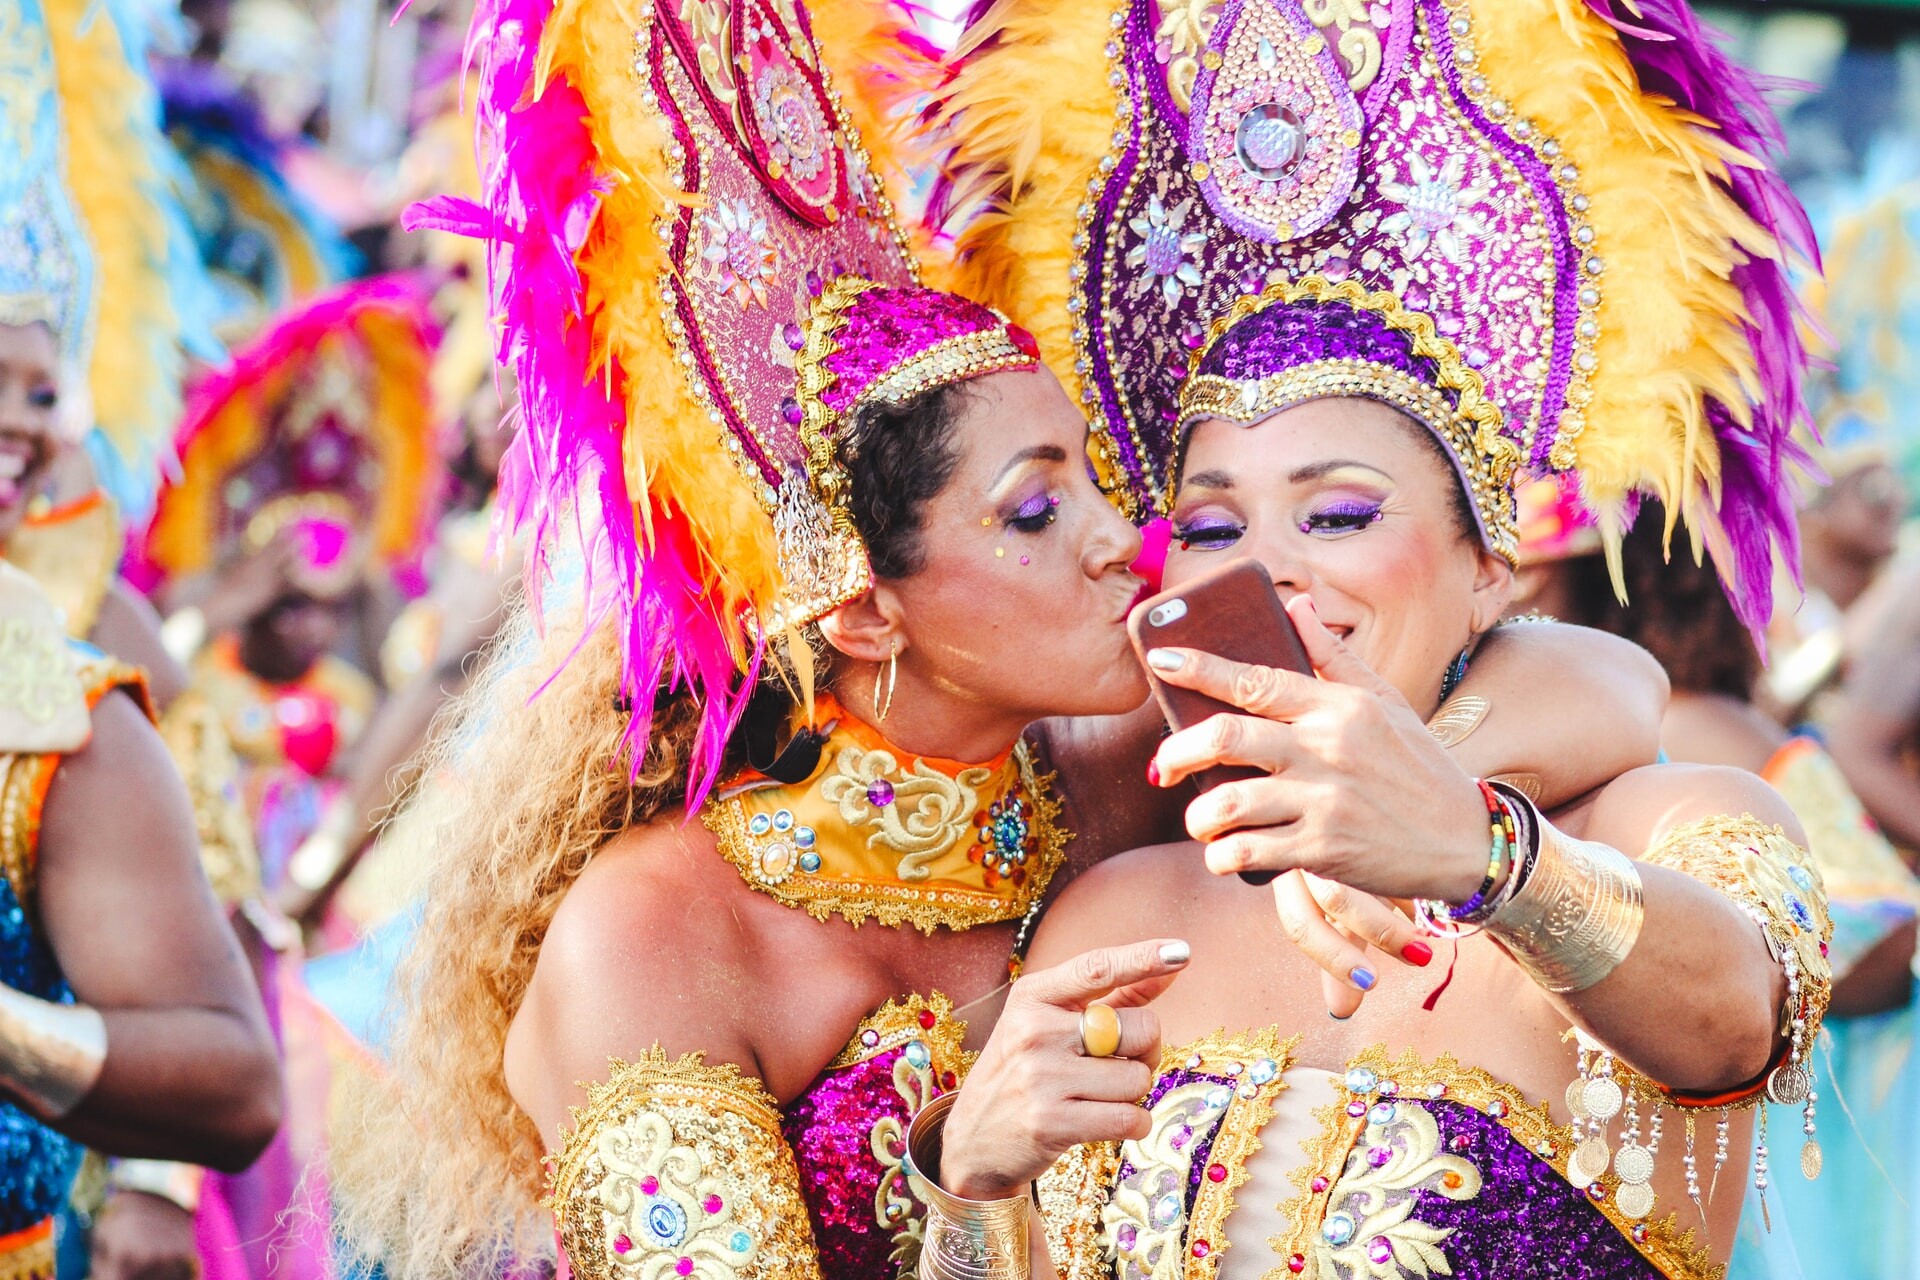 5 countries 5 epic festivals you must go to